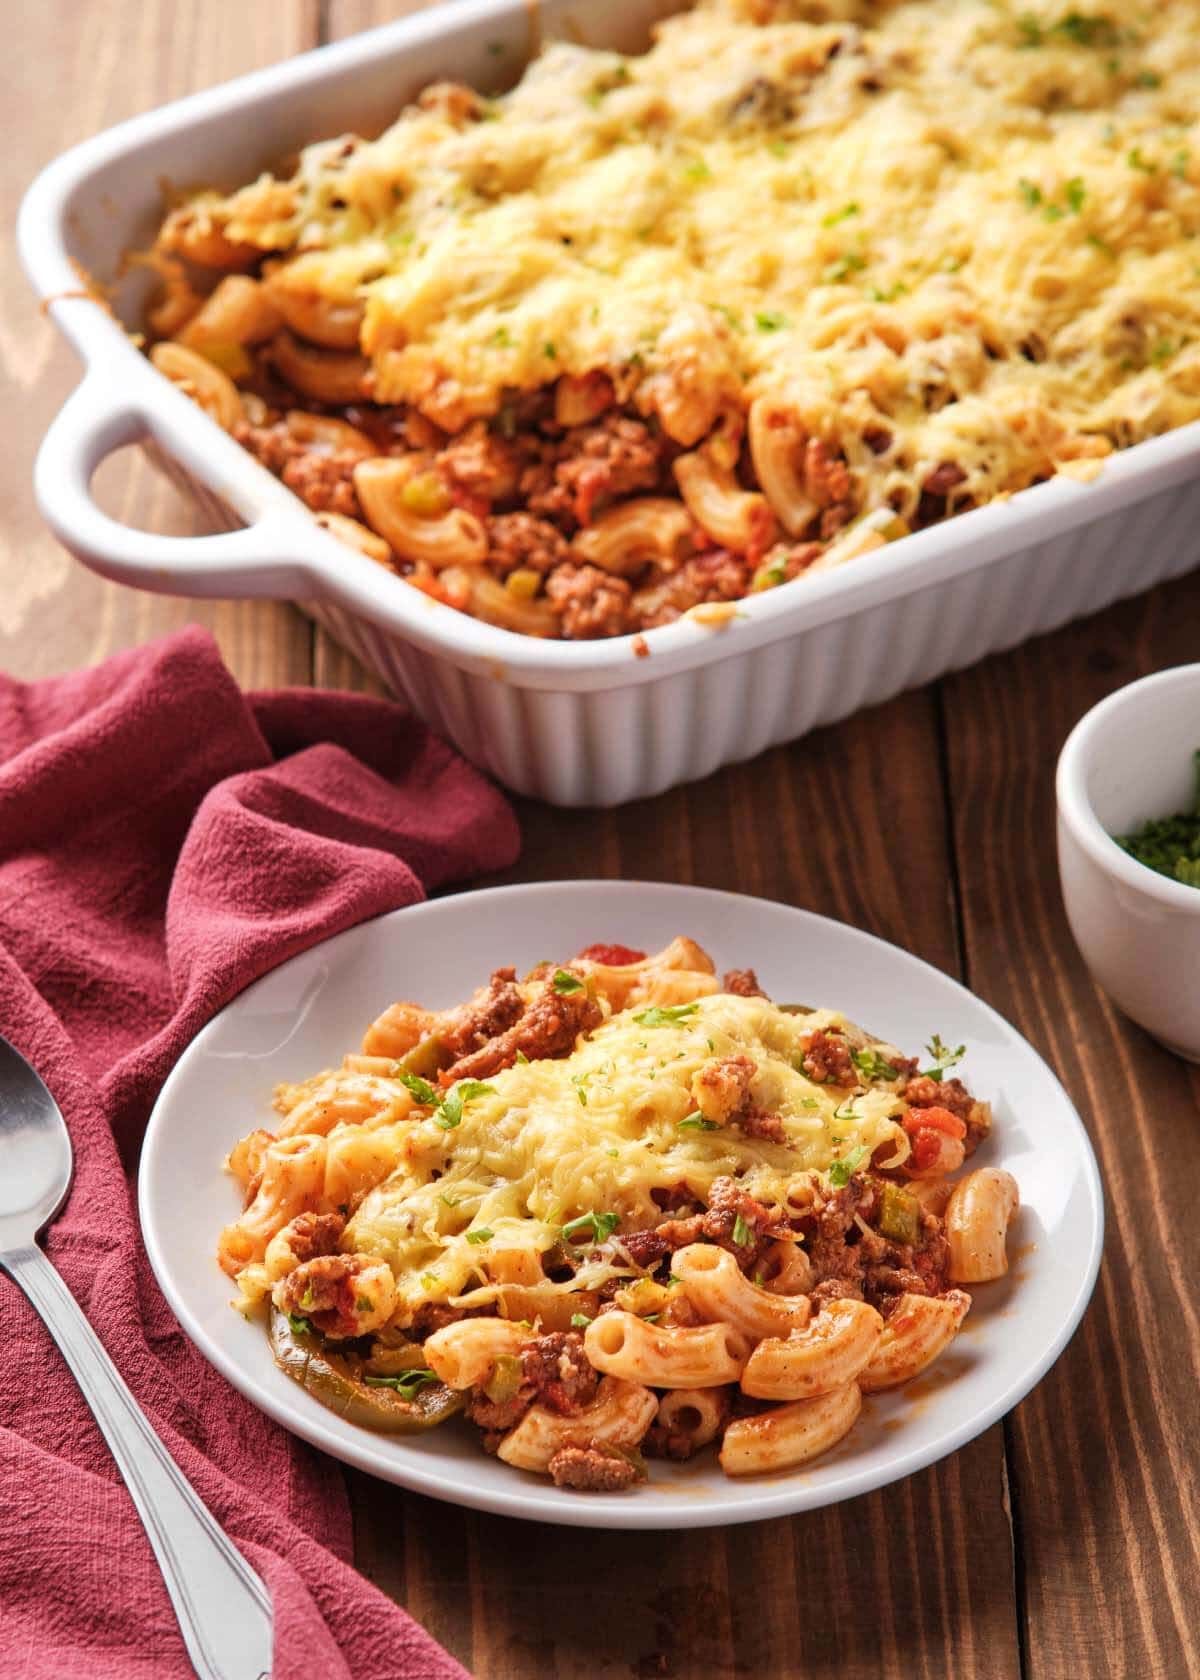 Sloppy Joe Casserole in white baking dish and on a plate.